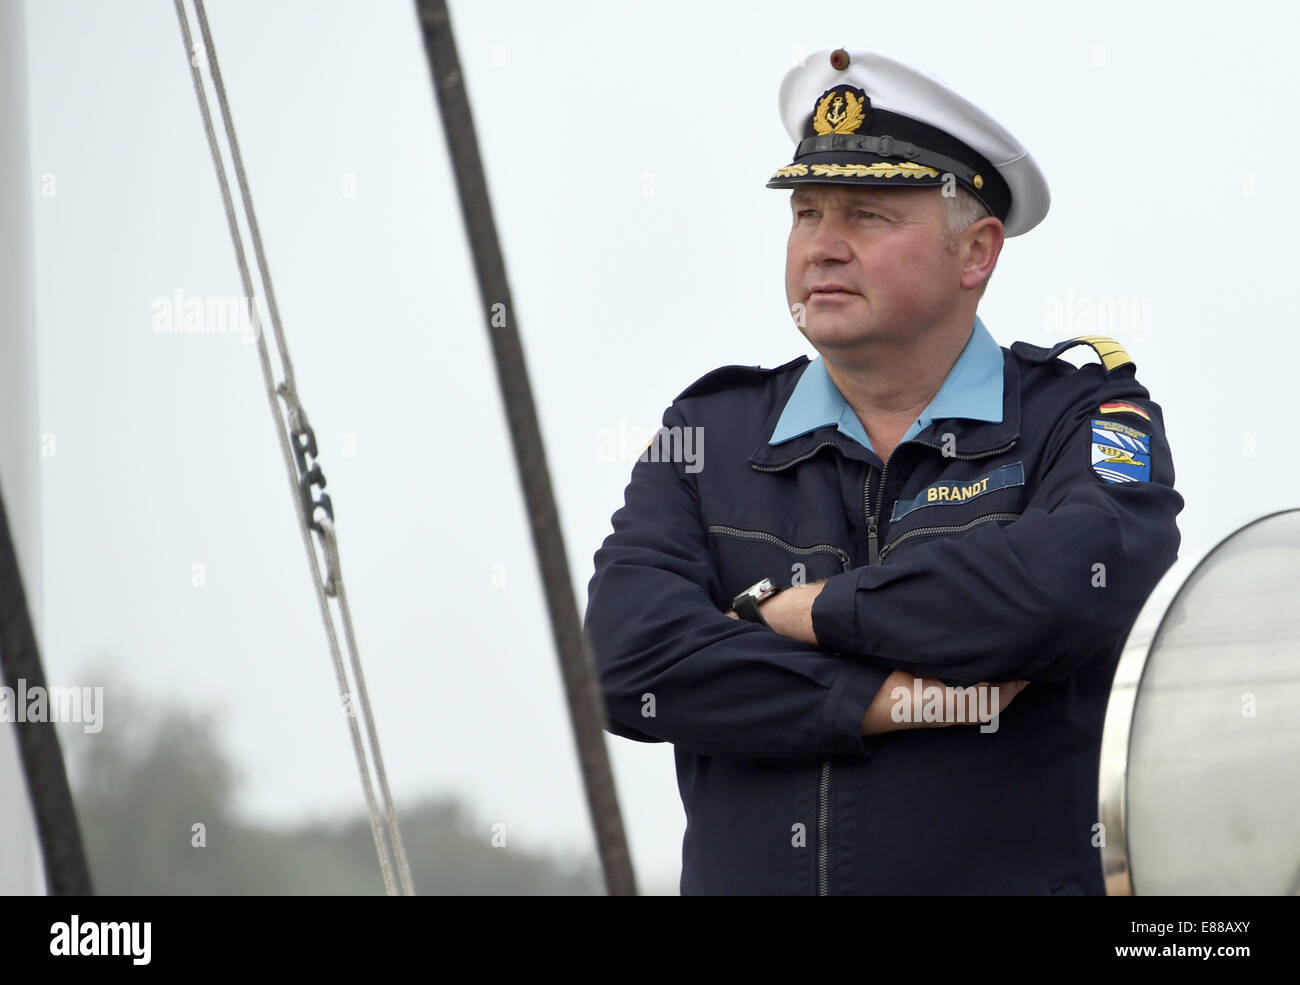 Kiel, Germany. 02nd Oct, 2014. Kiel, Germany. 2nd October, 2014. Captain Nils Brandt stands on deck as the Gorch Fock leaves port in Kiel, Germany, 02 October 2014. The navy's sailing training ship is heading out to sea on its 165th training trip. It will dock in La Rochelle, Malaga and Lisbon. It will return on 19 December. © dpa picture alliance/Alamy Live News Credit:  dpa/Alamy Live News Stock Photo